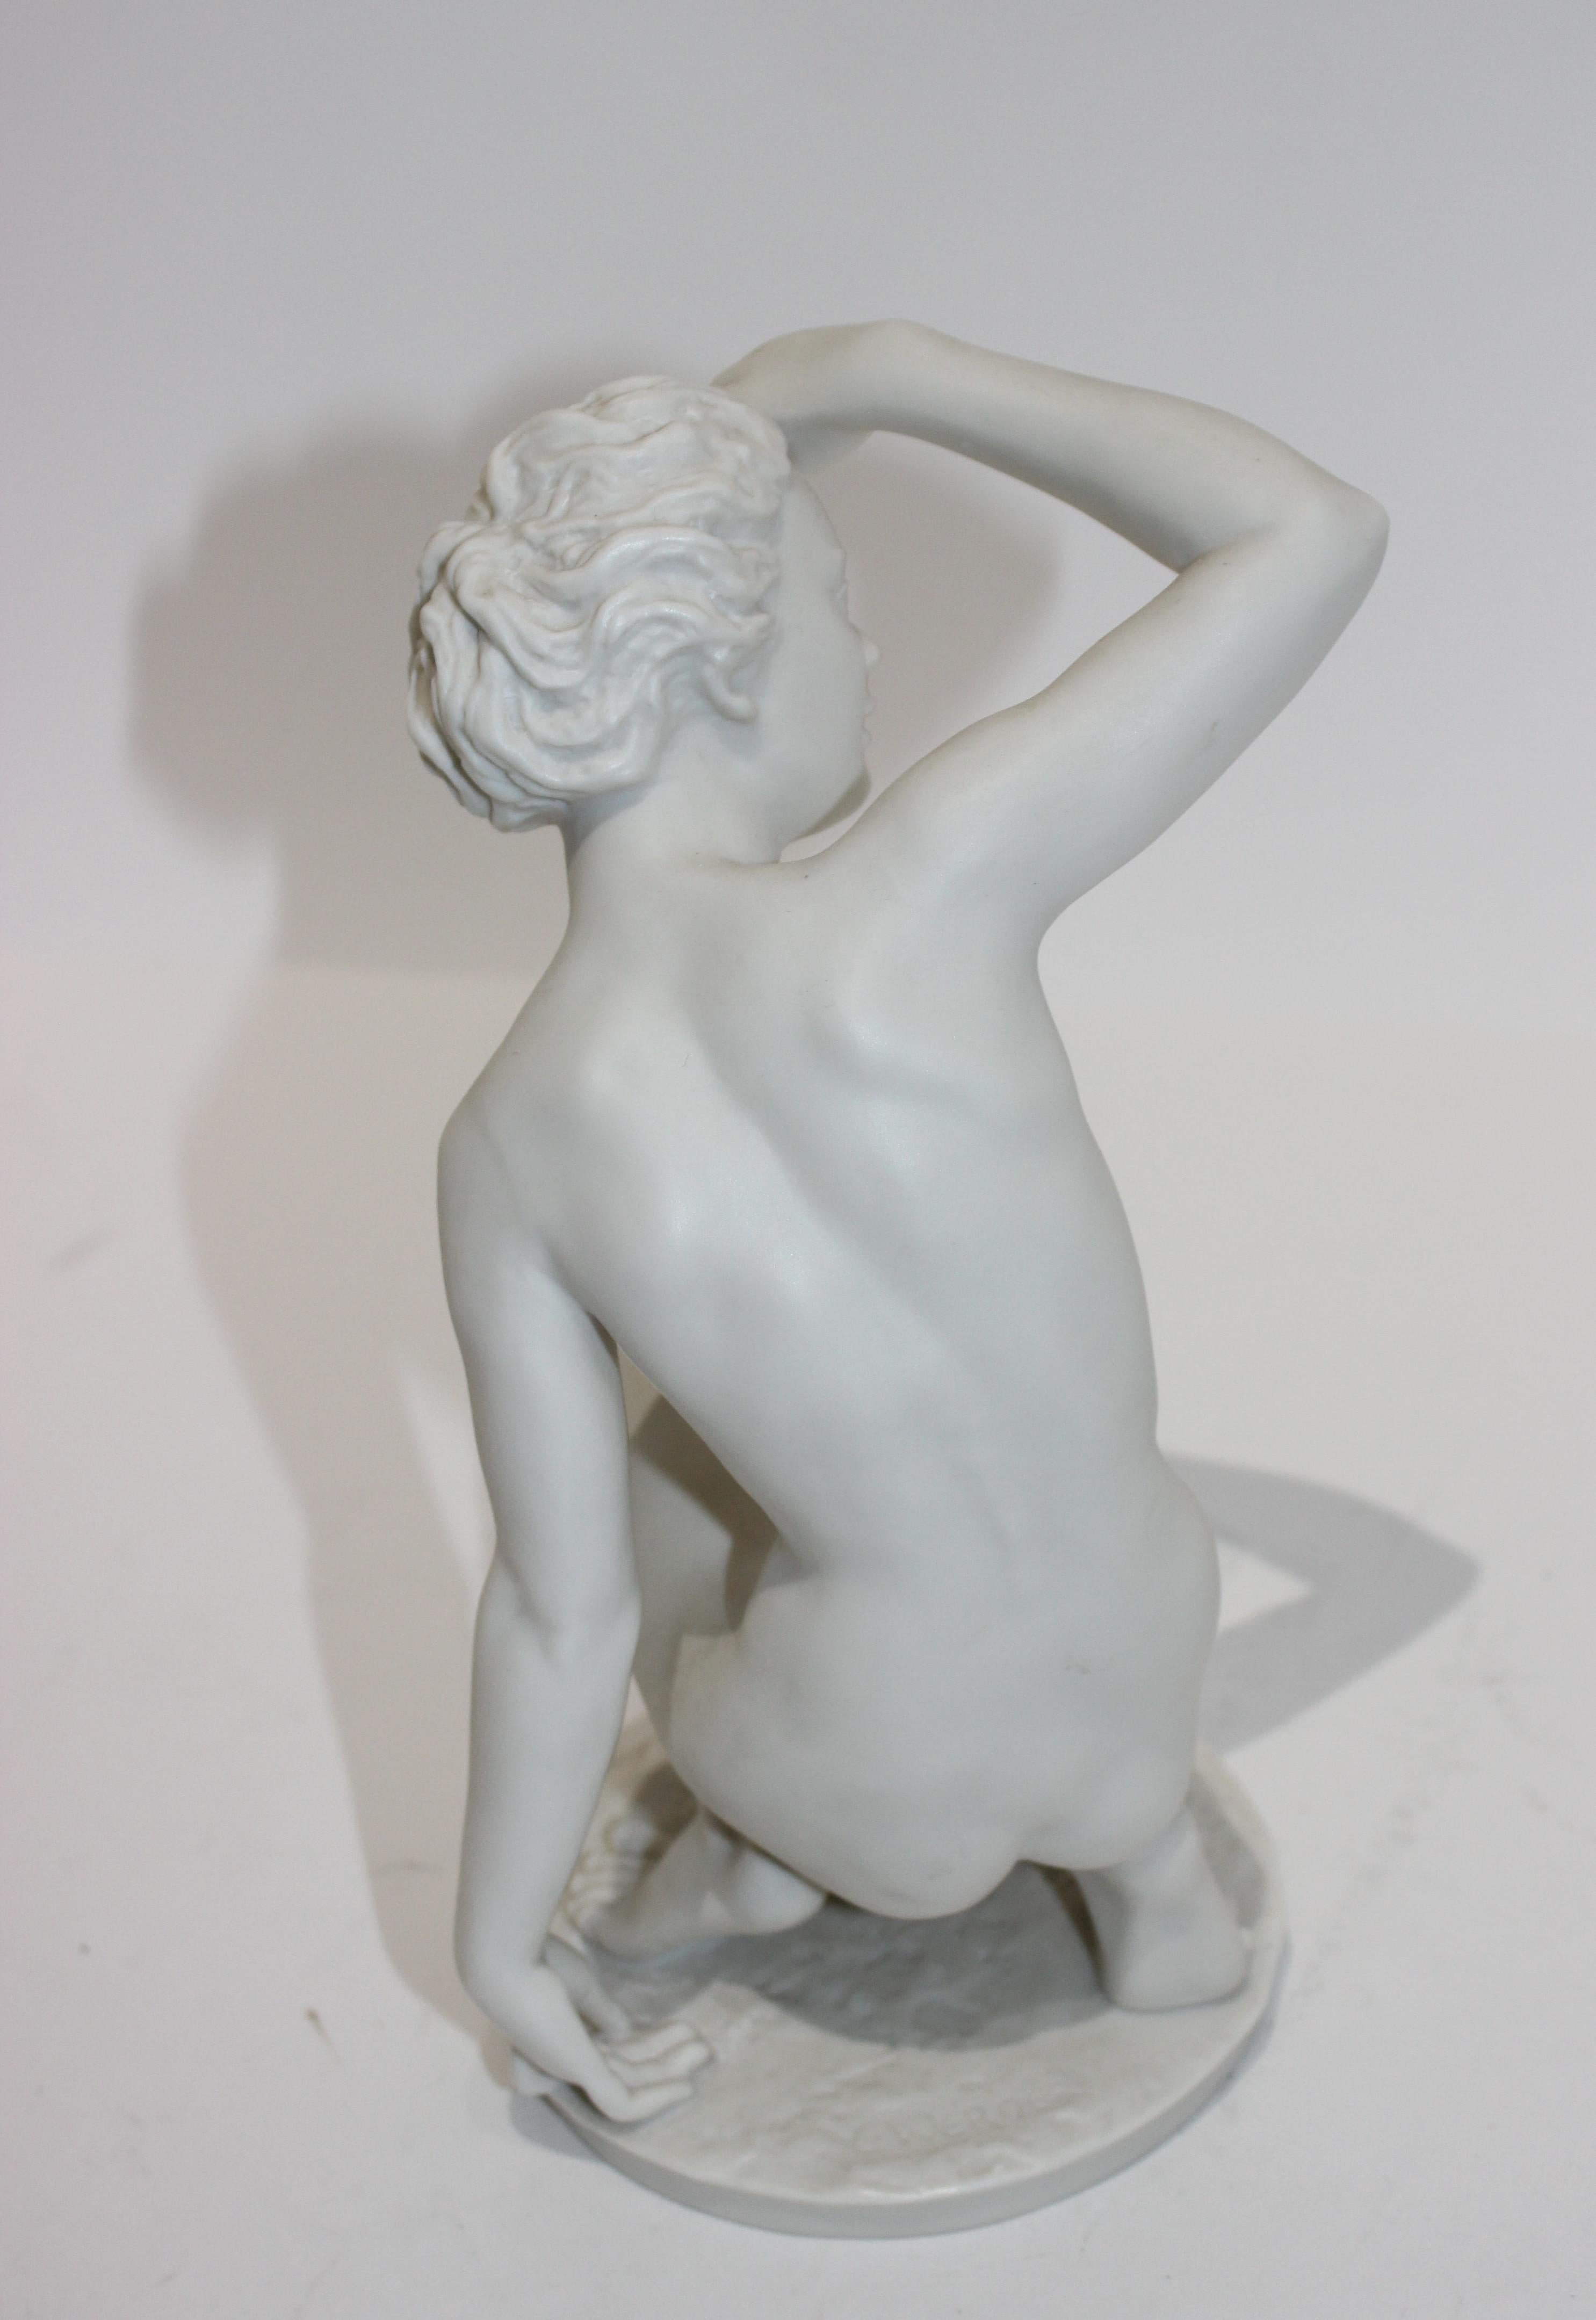 Bisque Figure of a Female Nude by Lorenz Hutschenreutner In Good Condition For Sale In West Palm Beach, FL